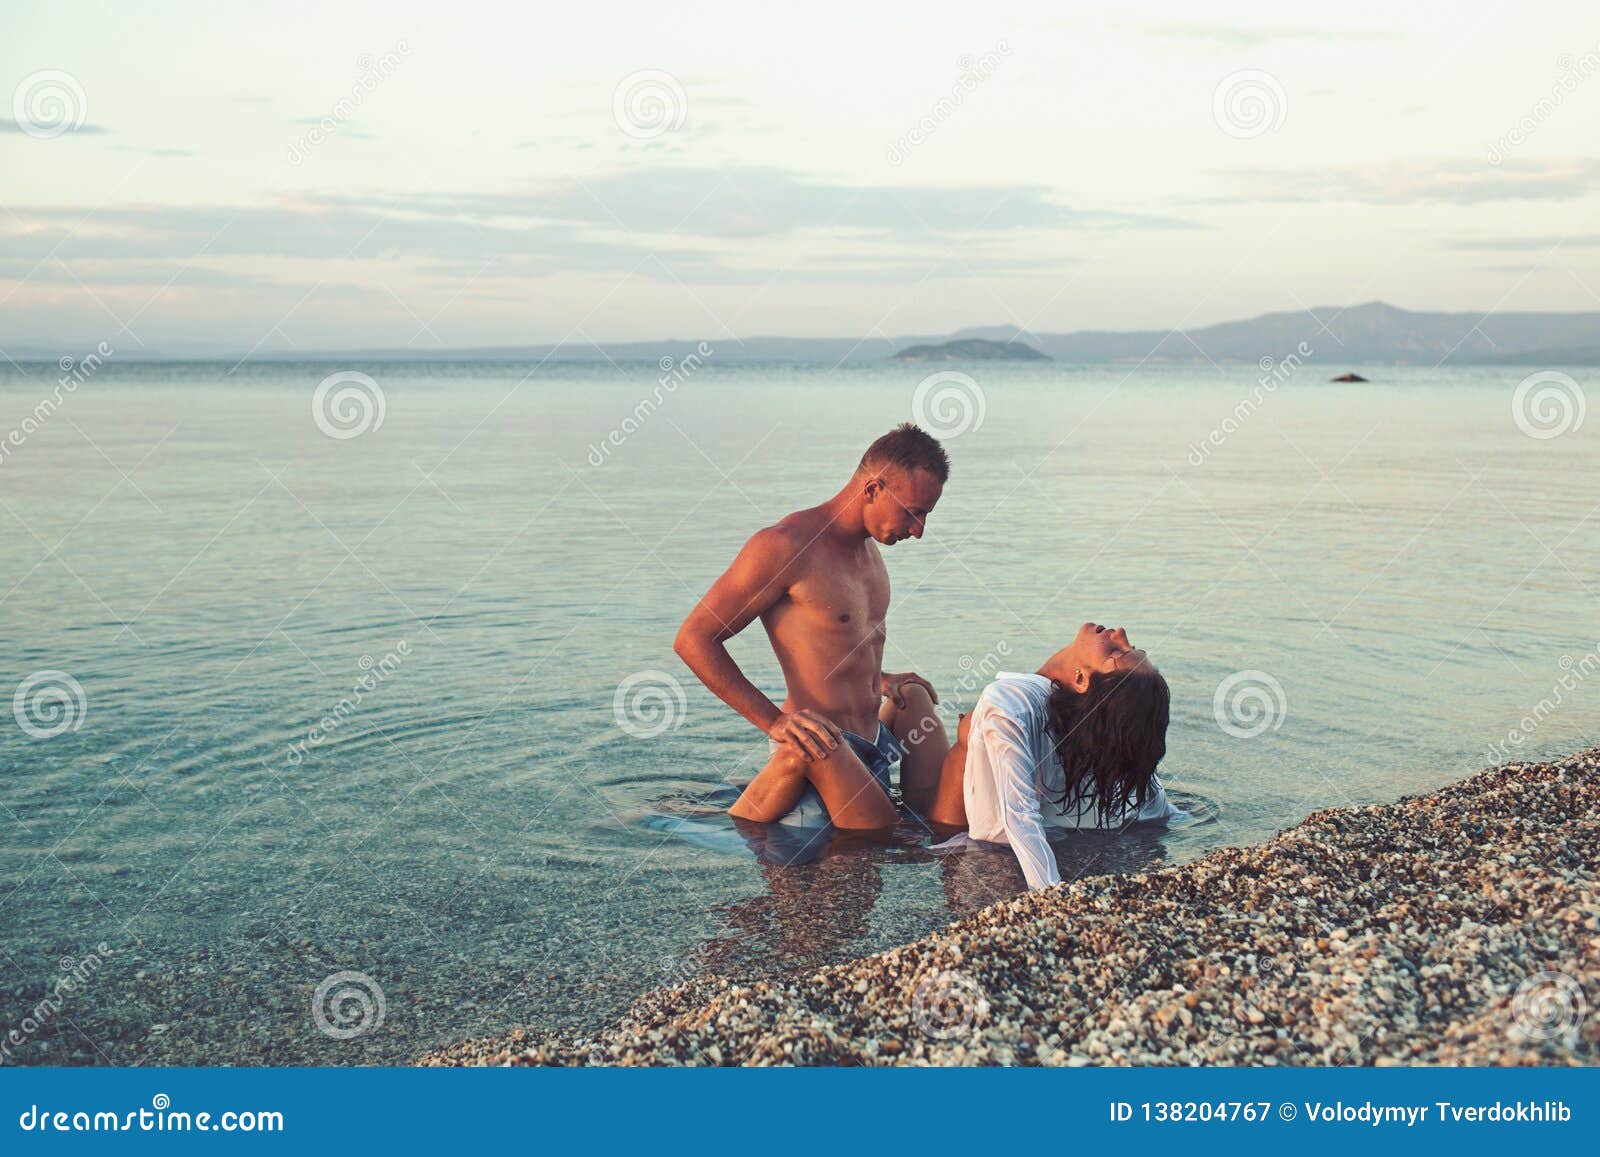 naked couples having sex at the beach